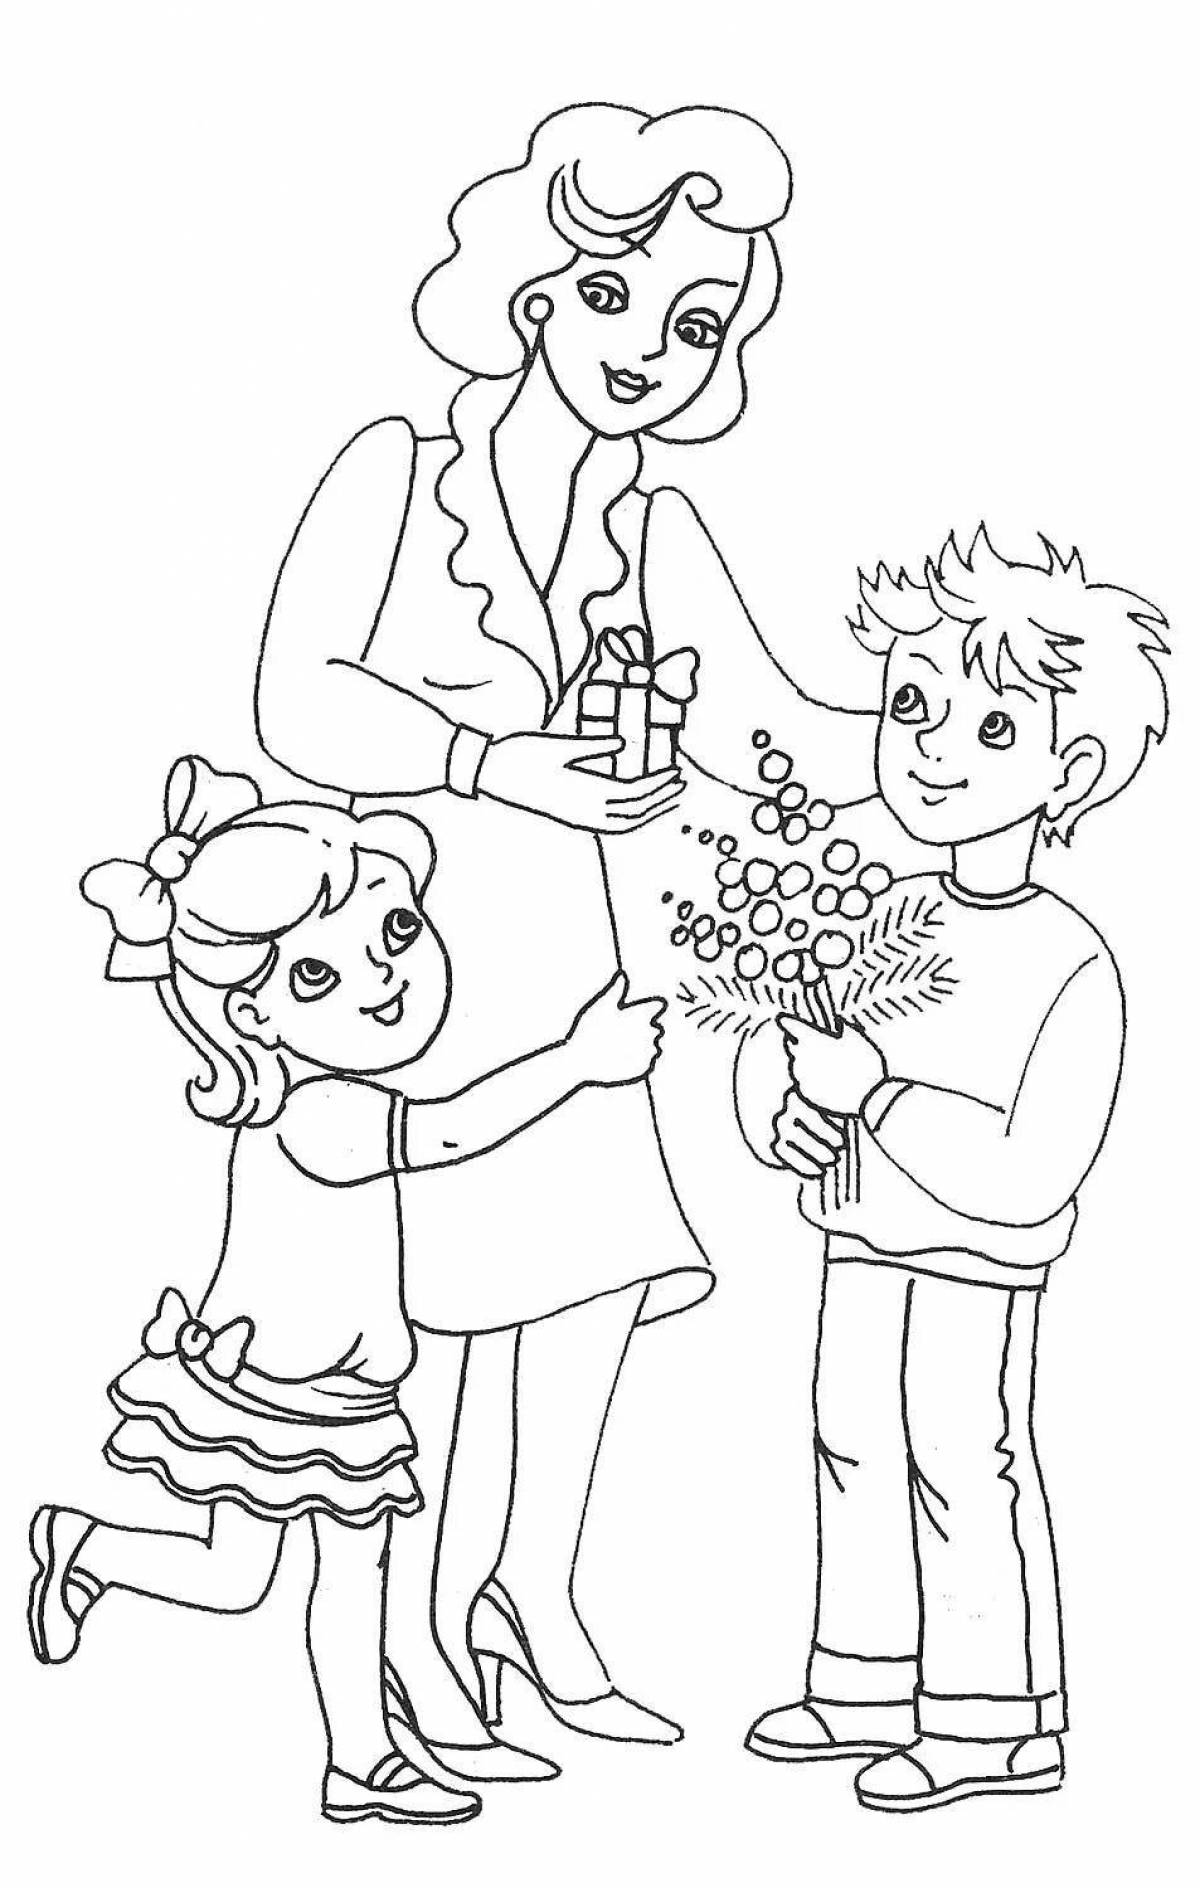 Lively my mom coloring book